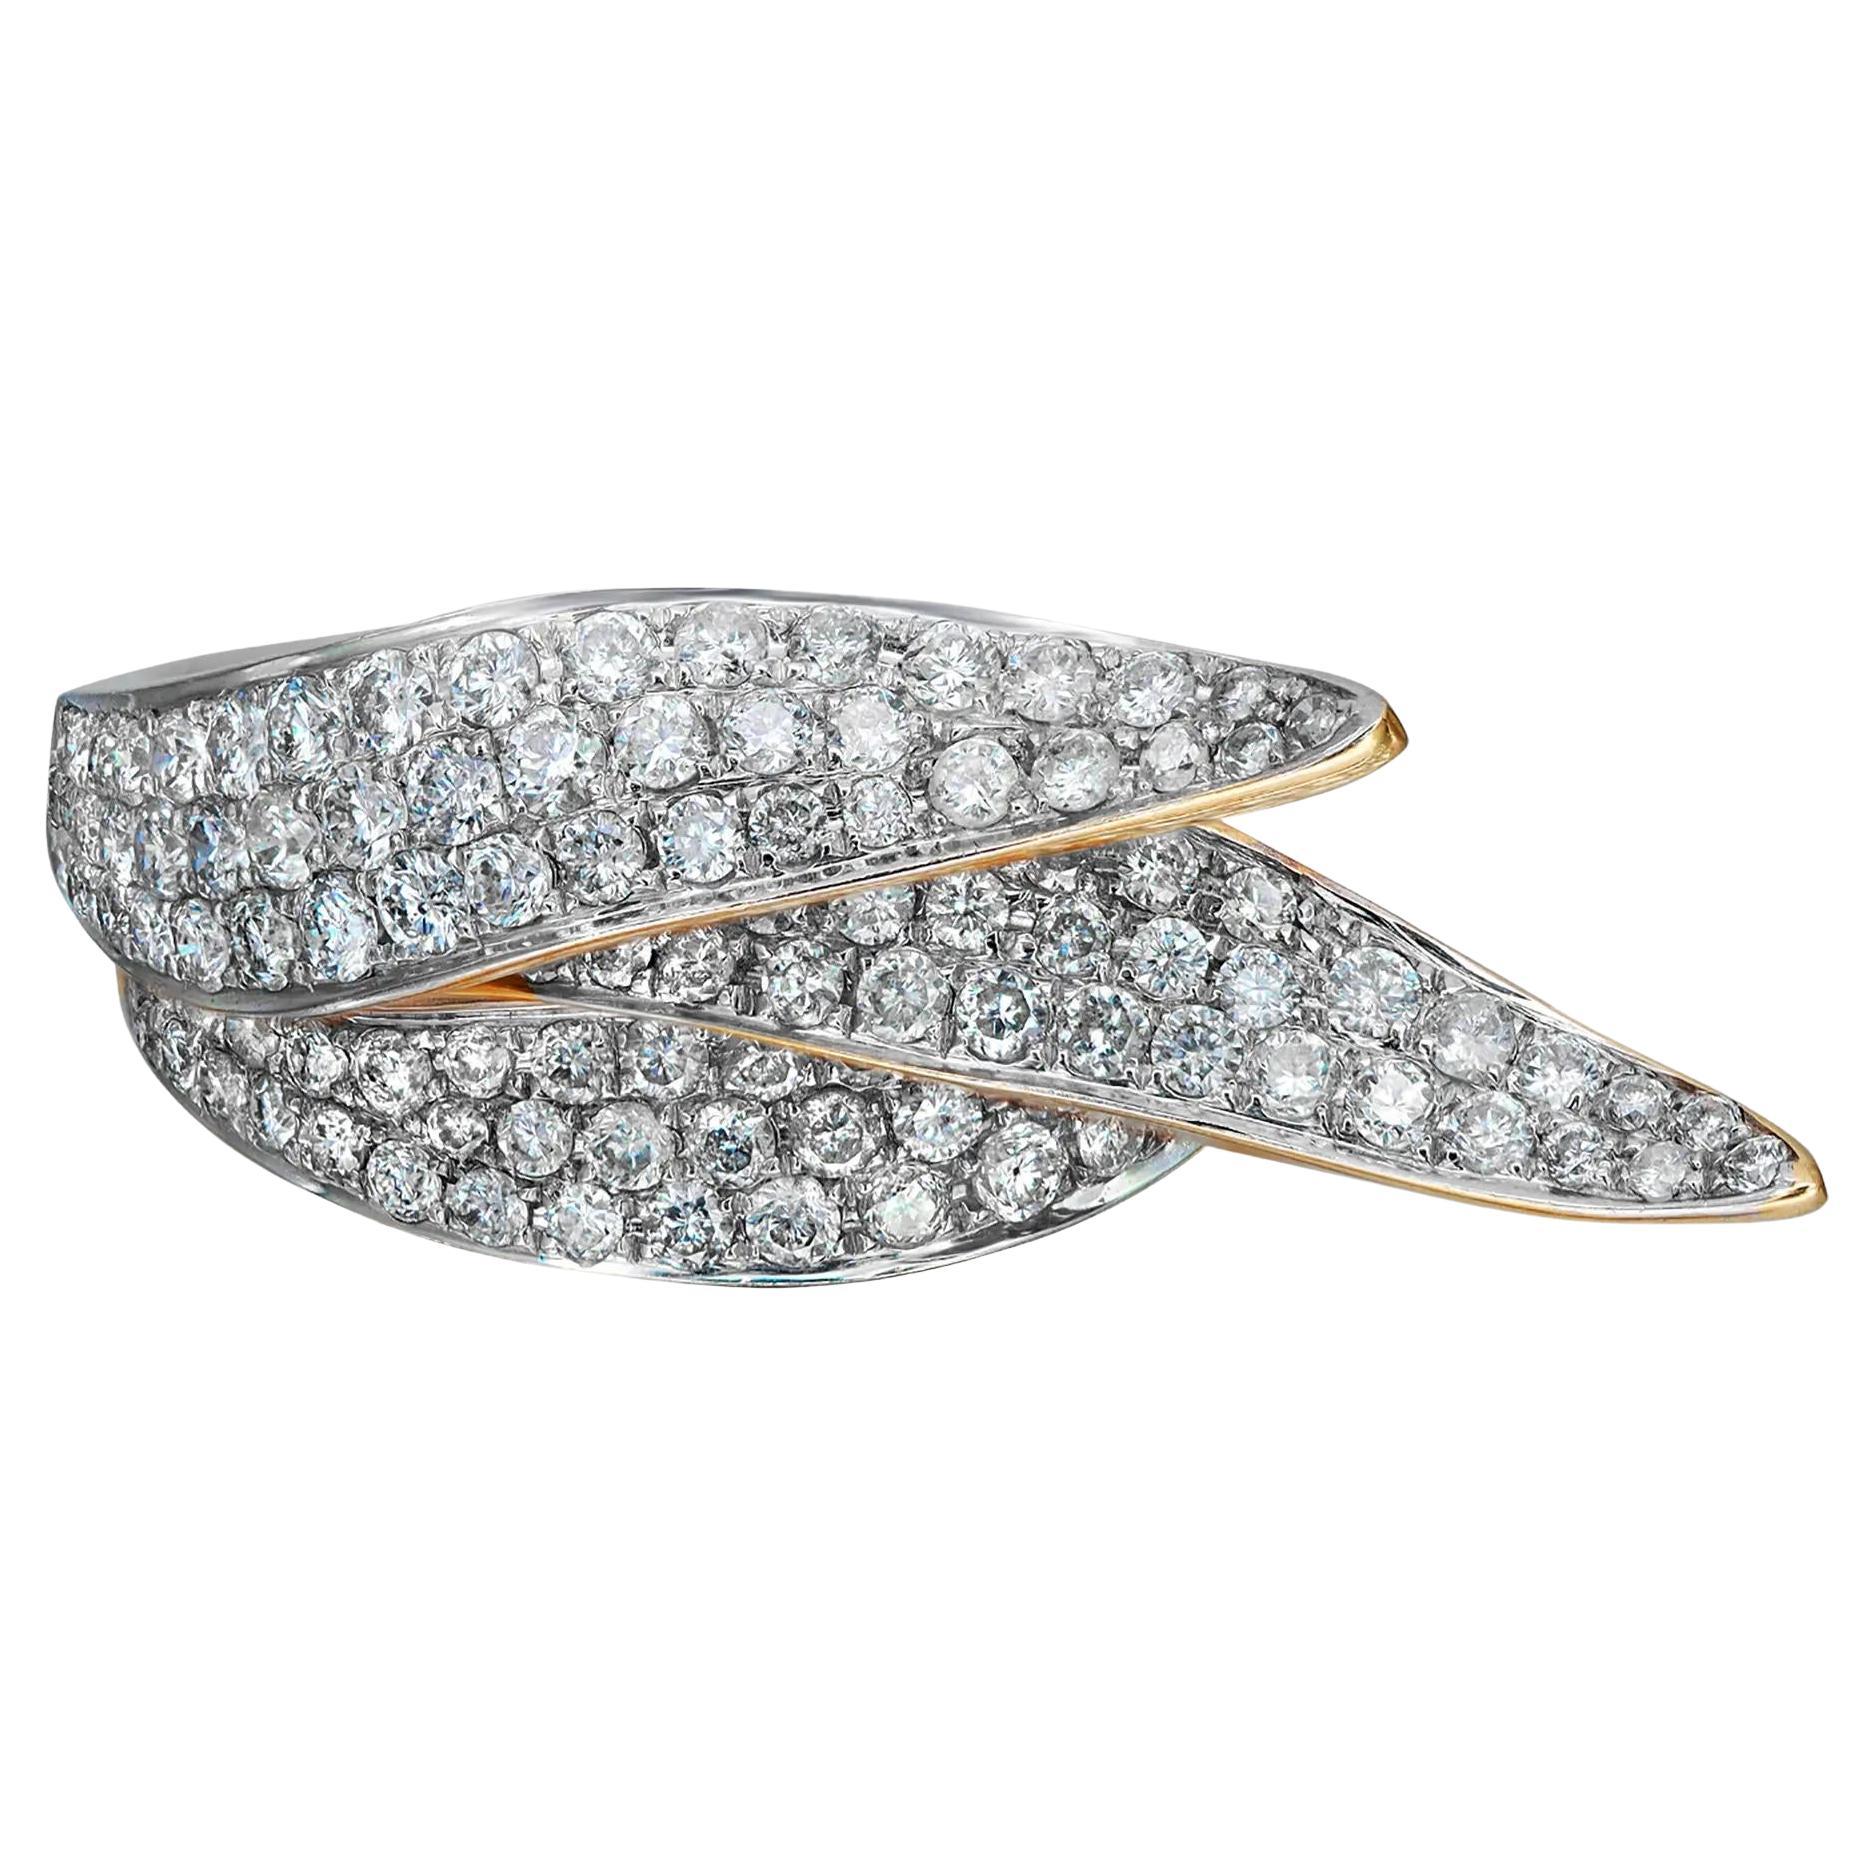 1.47Ctw Pave Set Round Cut Diamond Ladies Cocktail Ring 14K Yellow Gold Size 7.5 For Sale